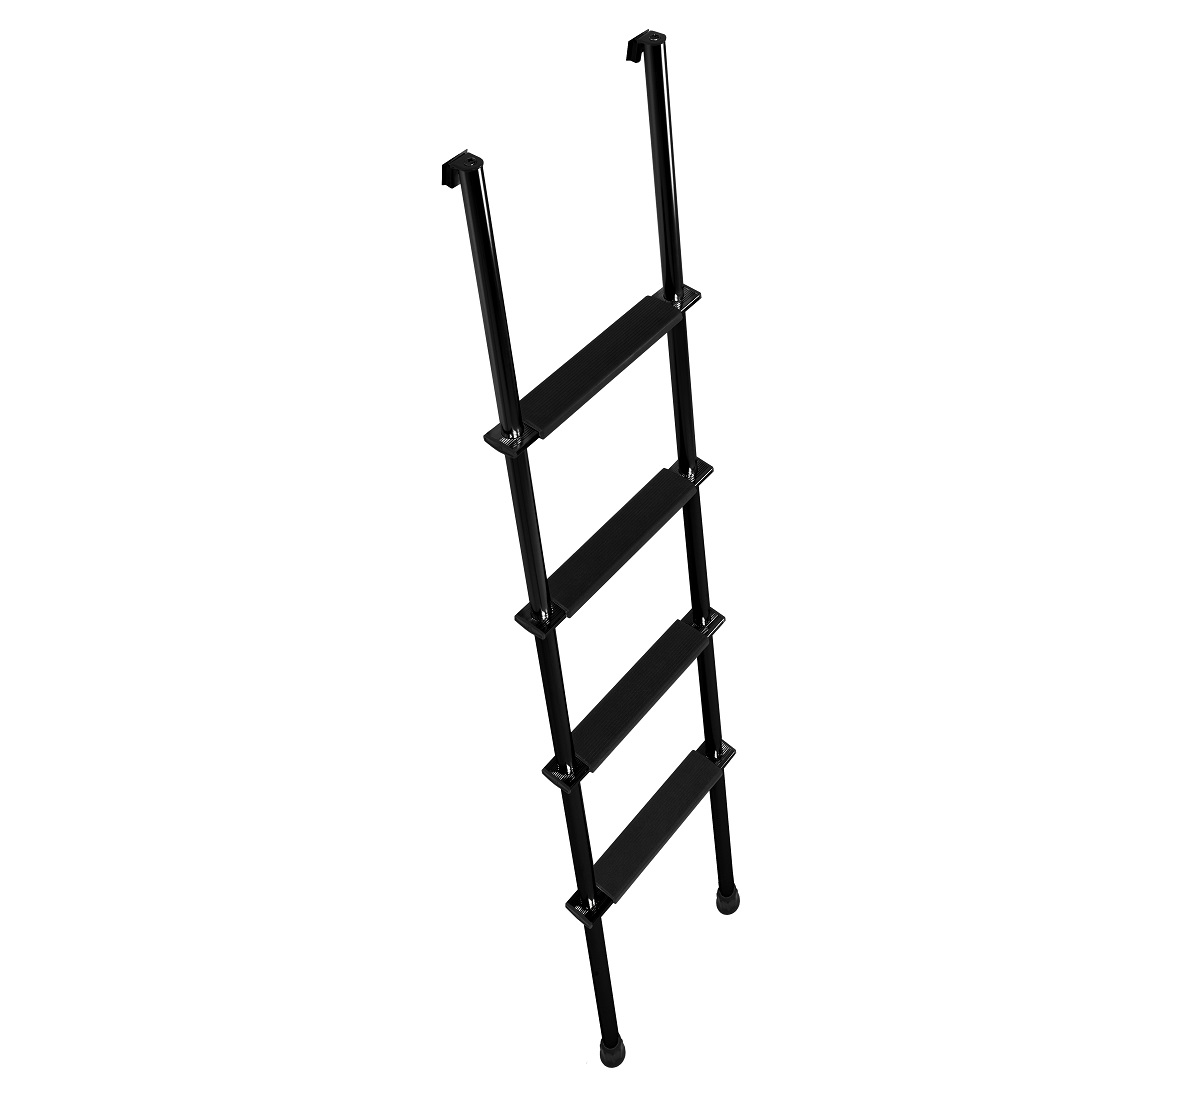 A Stromberg Carlson LA-466 Bunk Ladder on a white background.